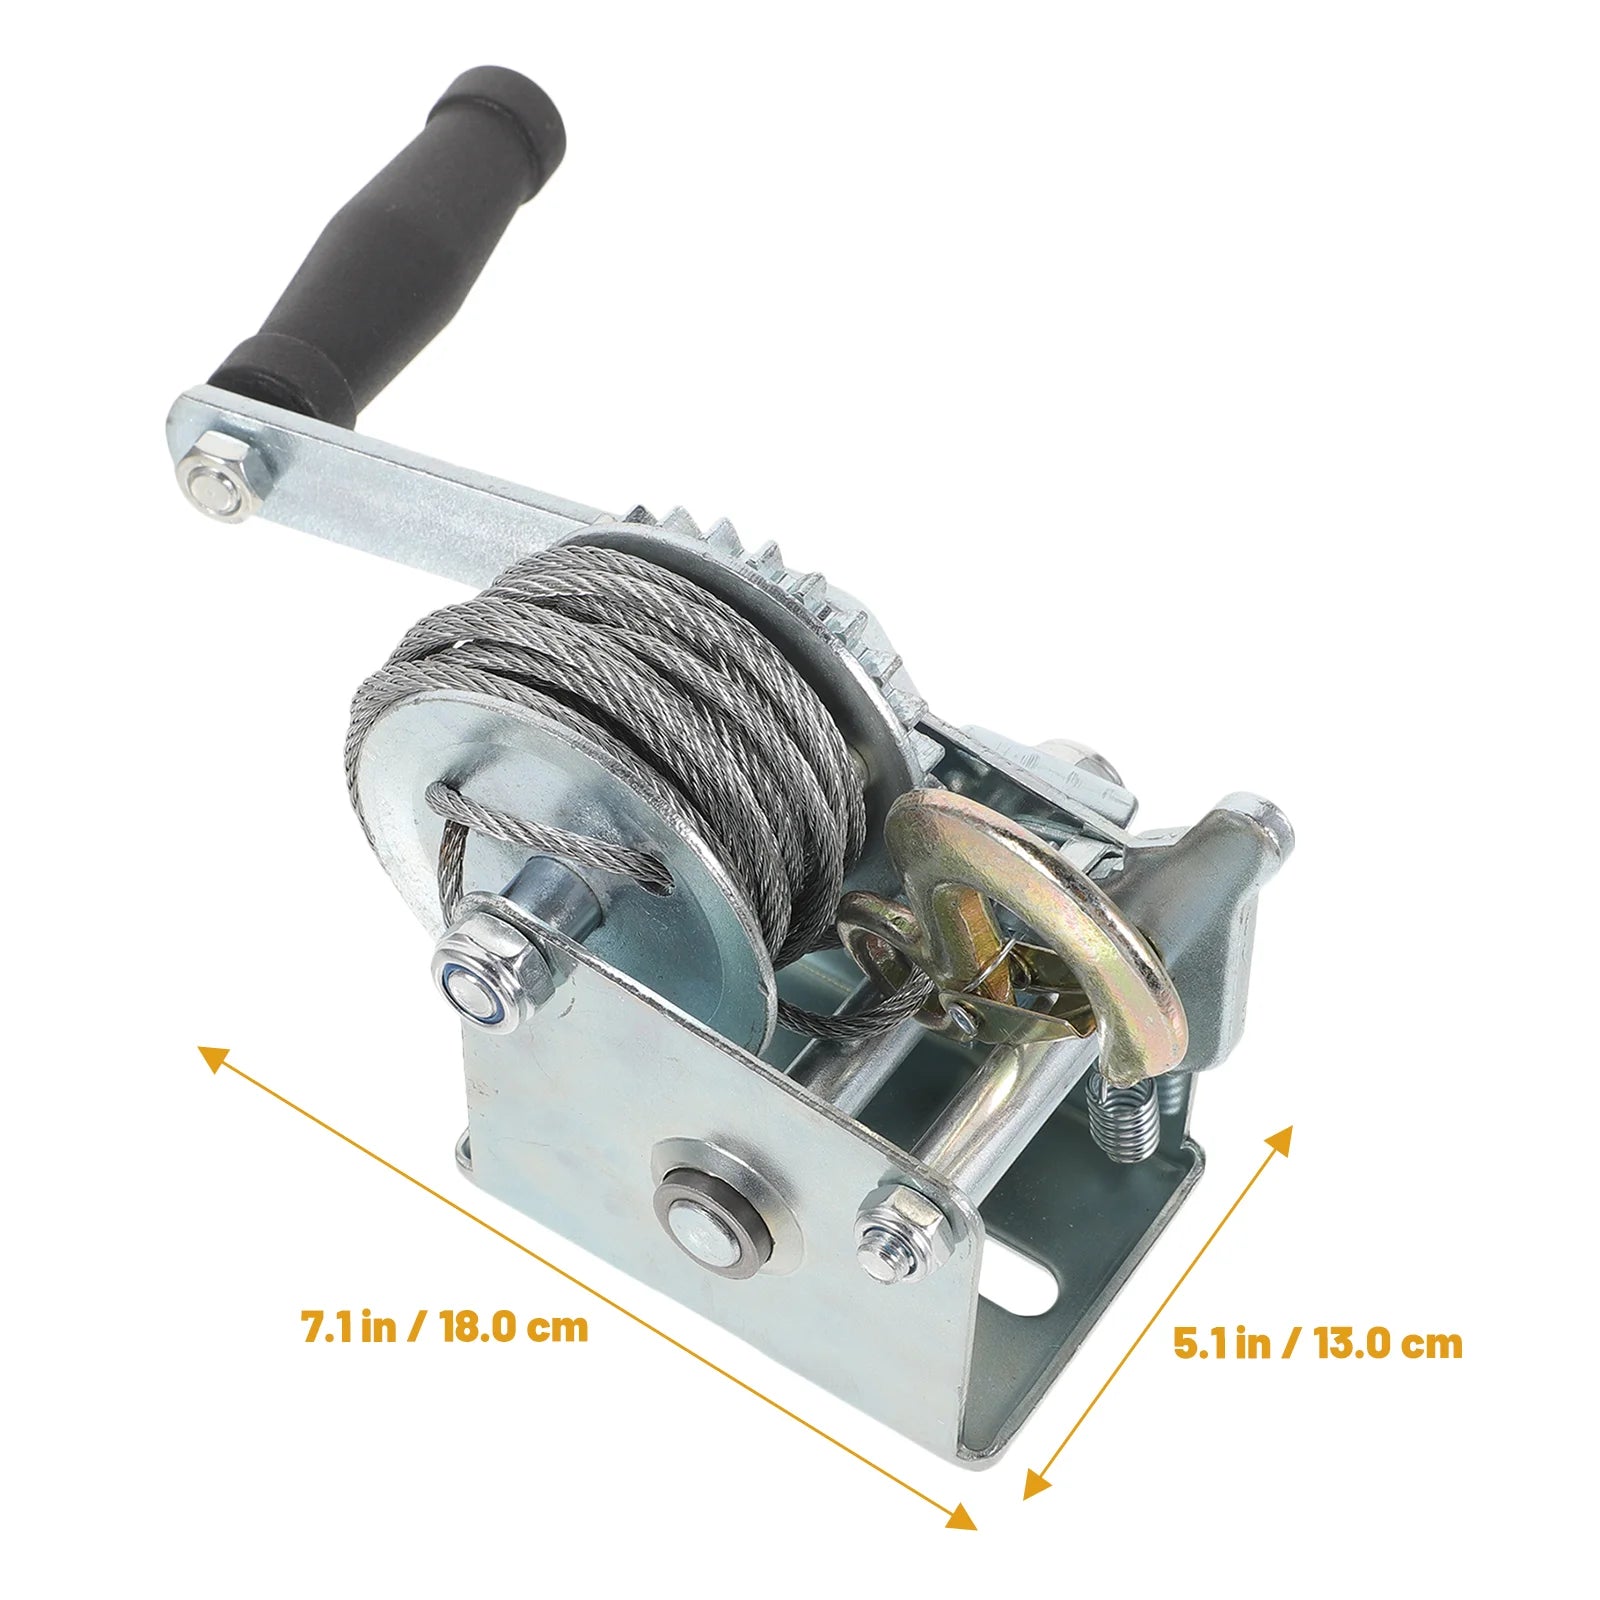 Hand Winch Trailer Winch Small Winch Hand Crank Winch 500LBS (With 7m Steel Cable)